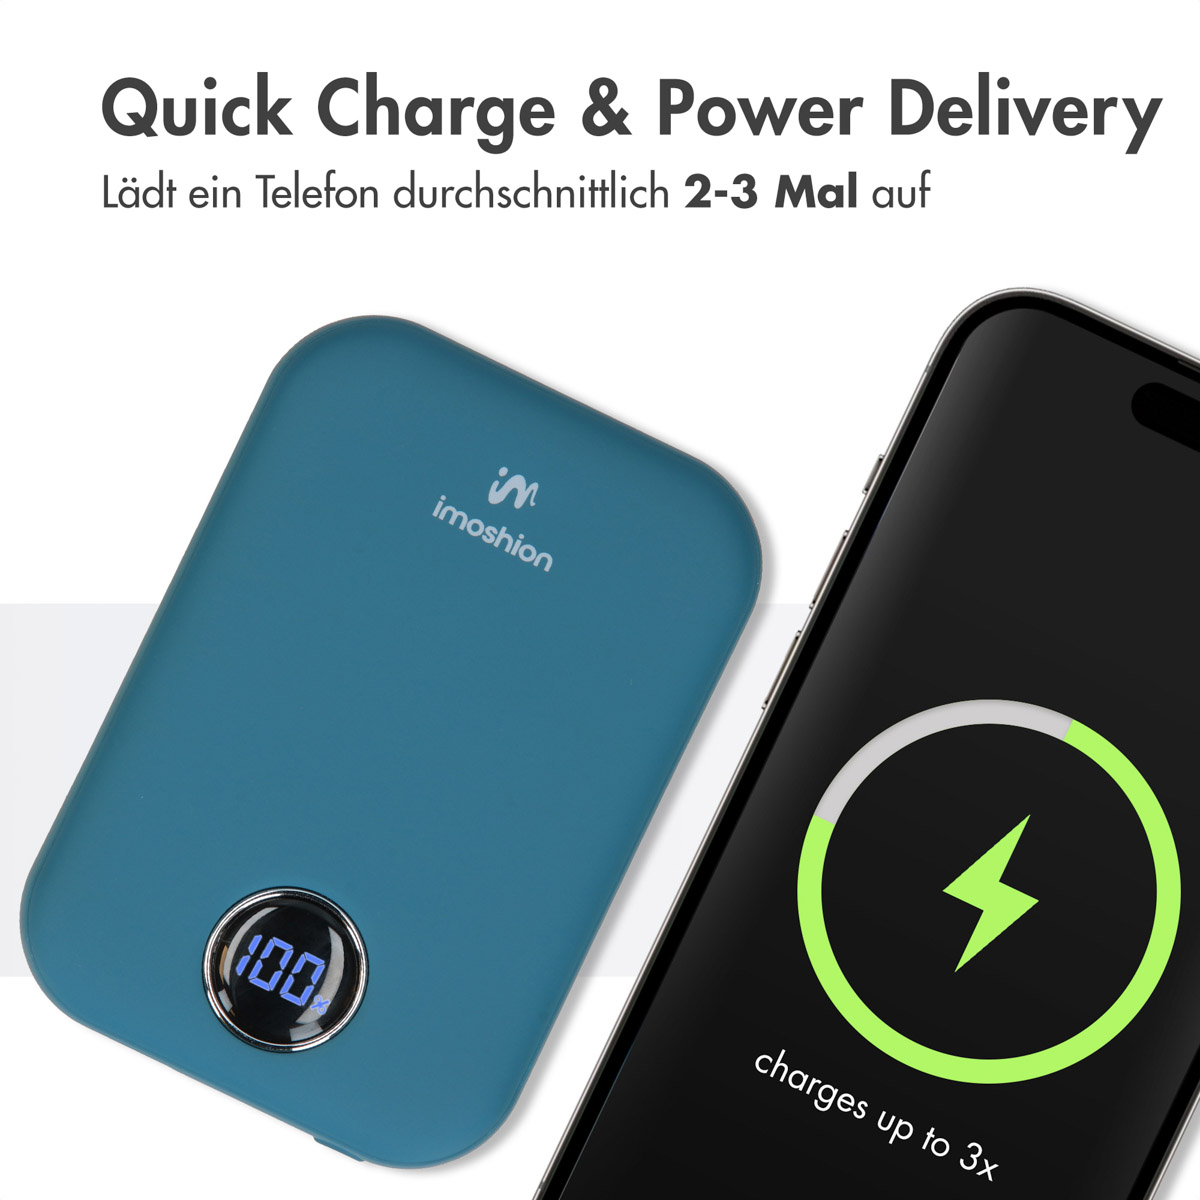 IMOSHION Power Delivery & Quick Blau Powerbank Charge mAh MagSafe 10000